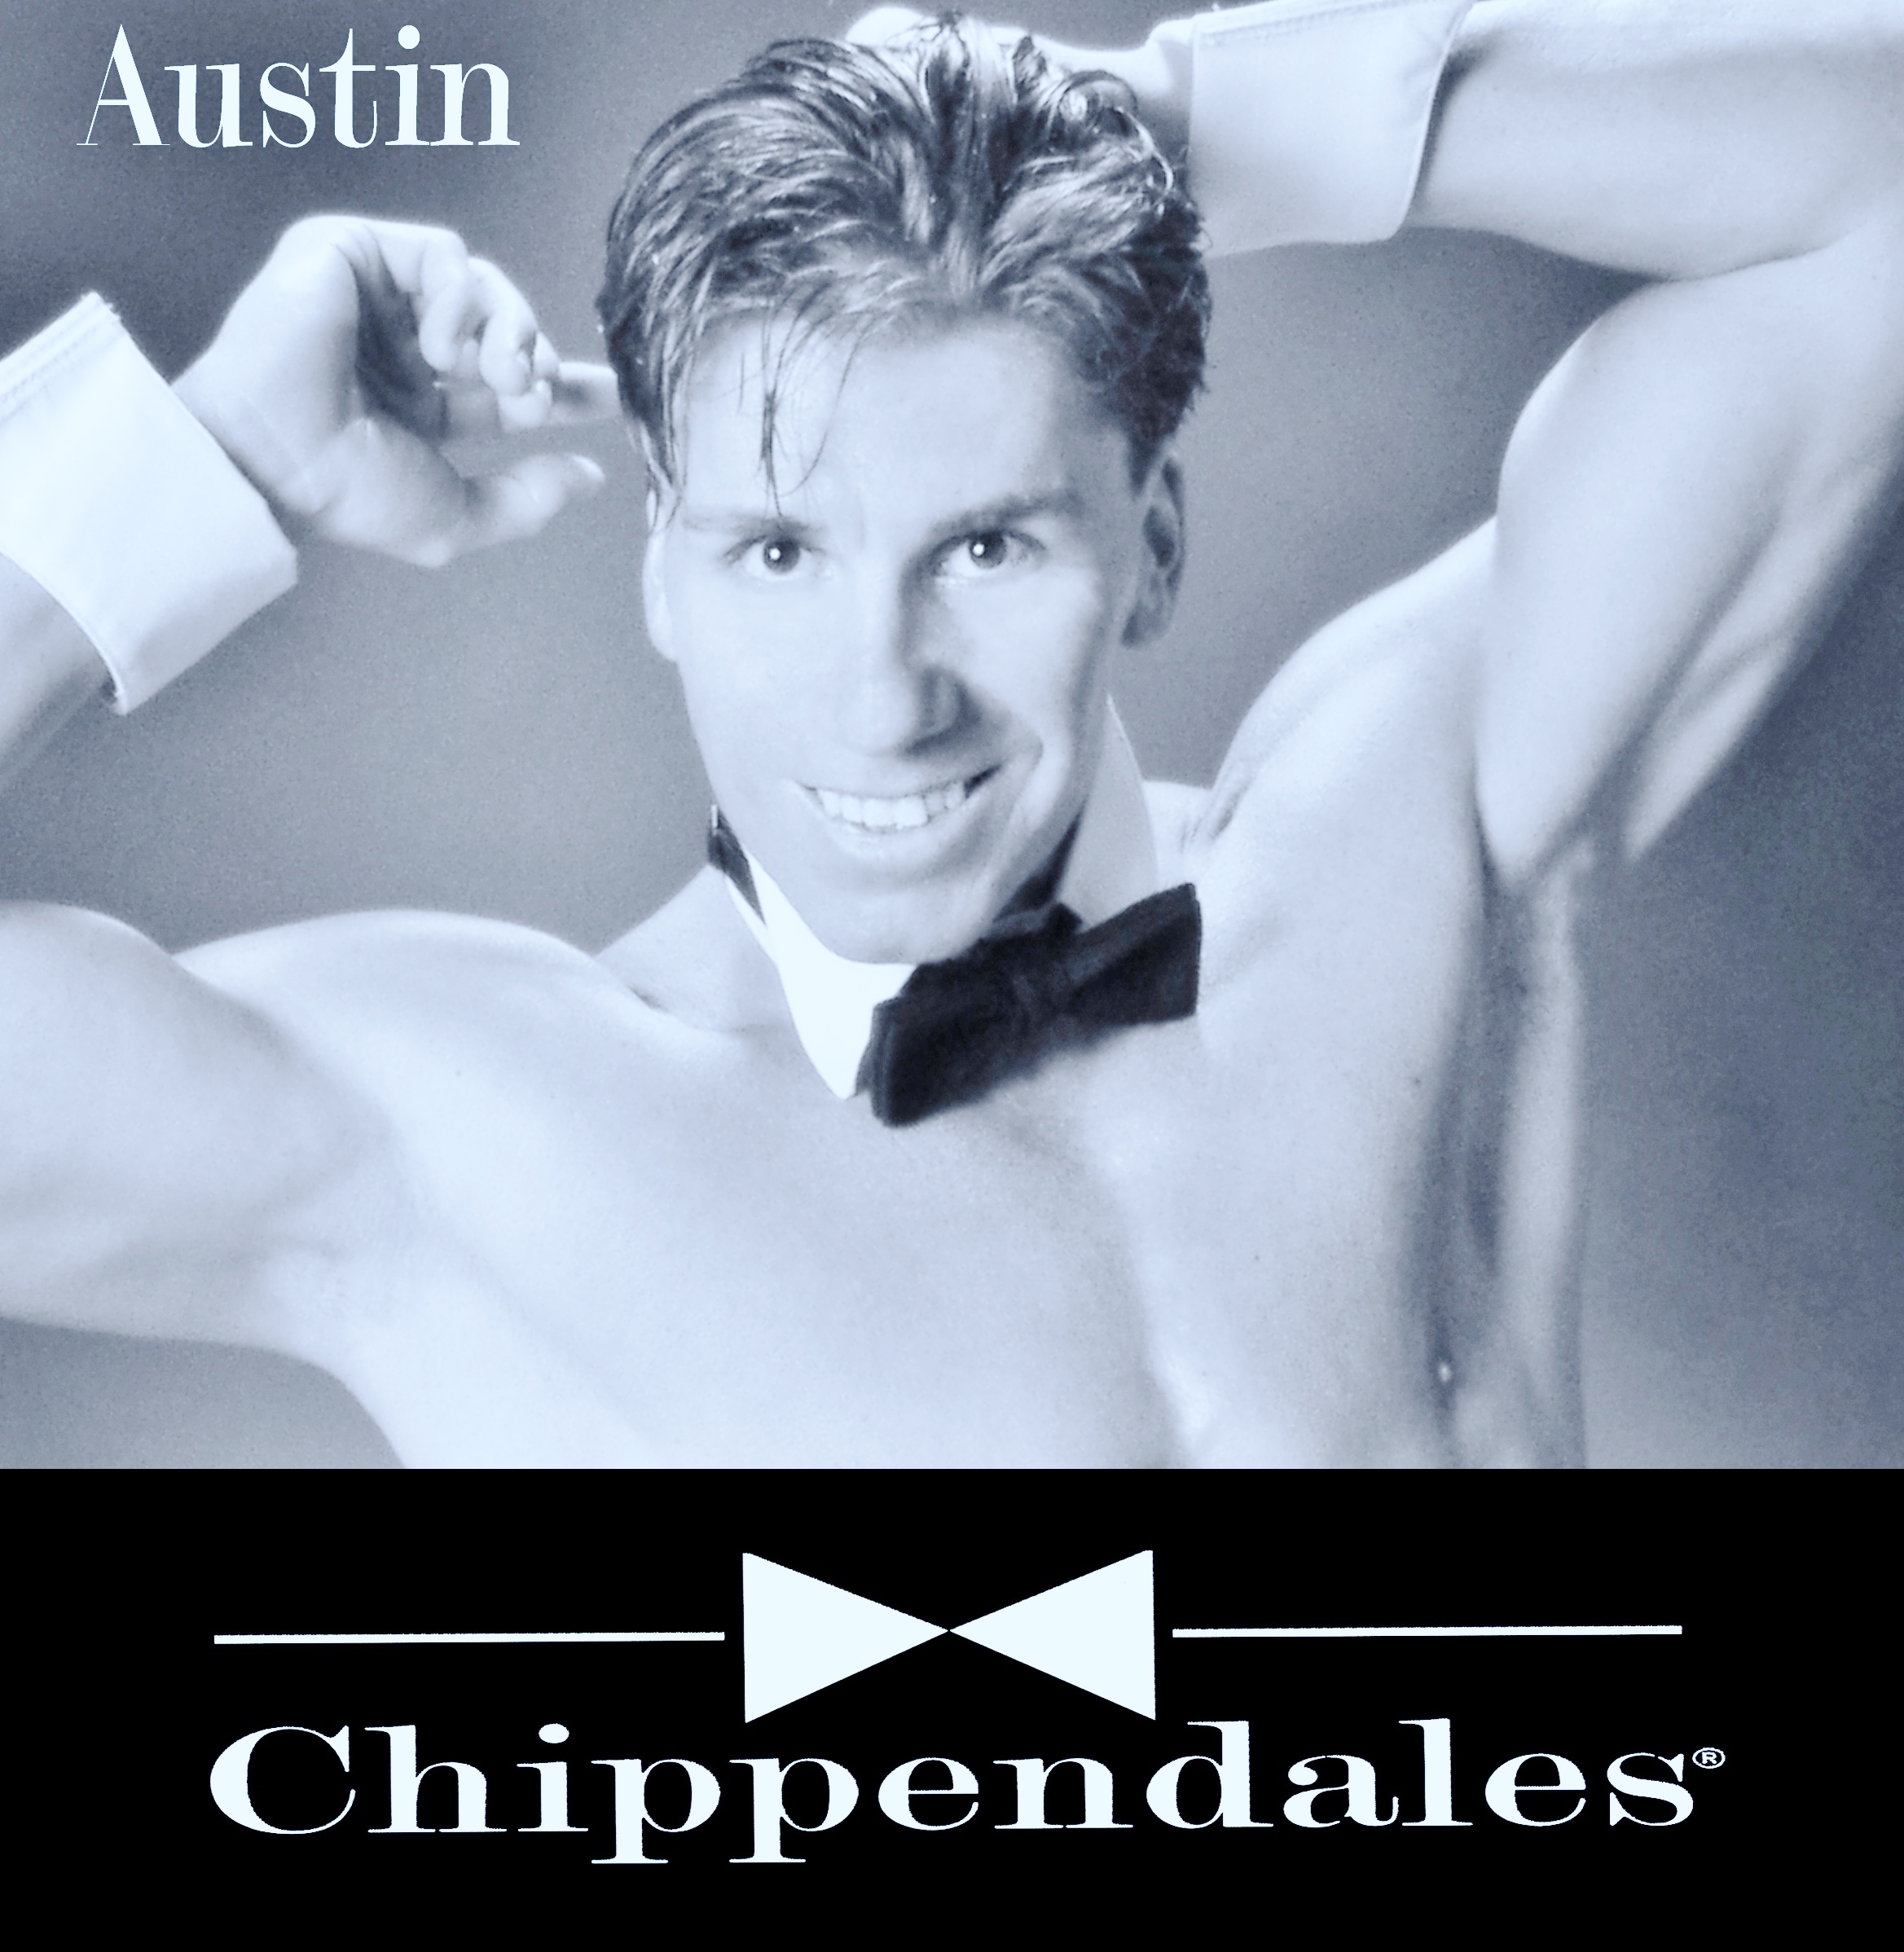 Arty Nichols Chippendales